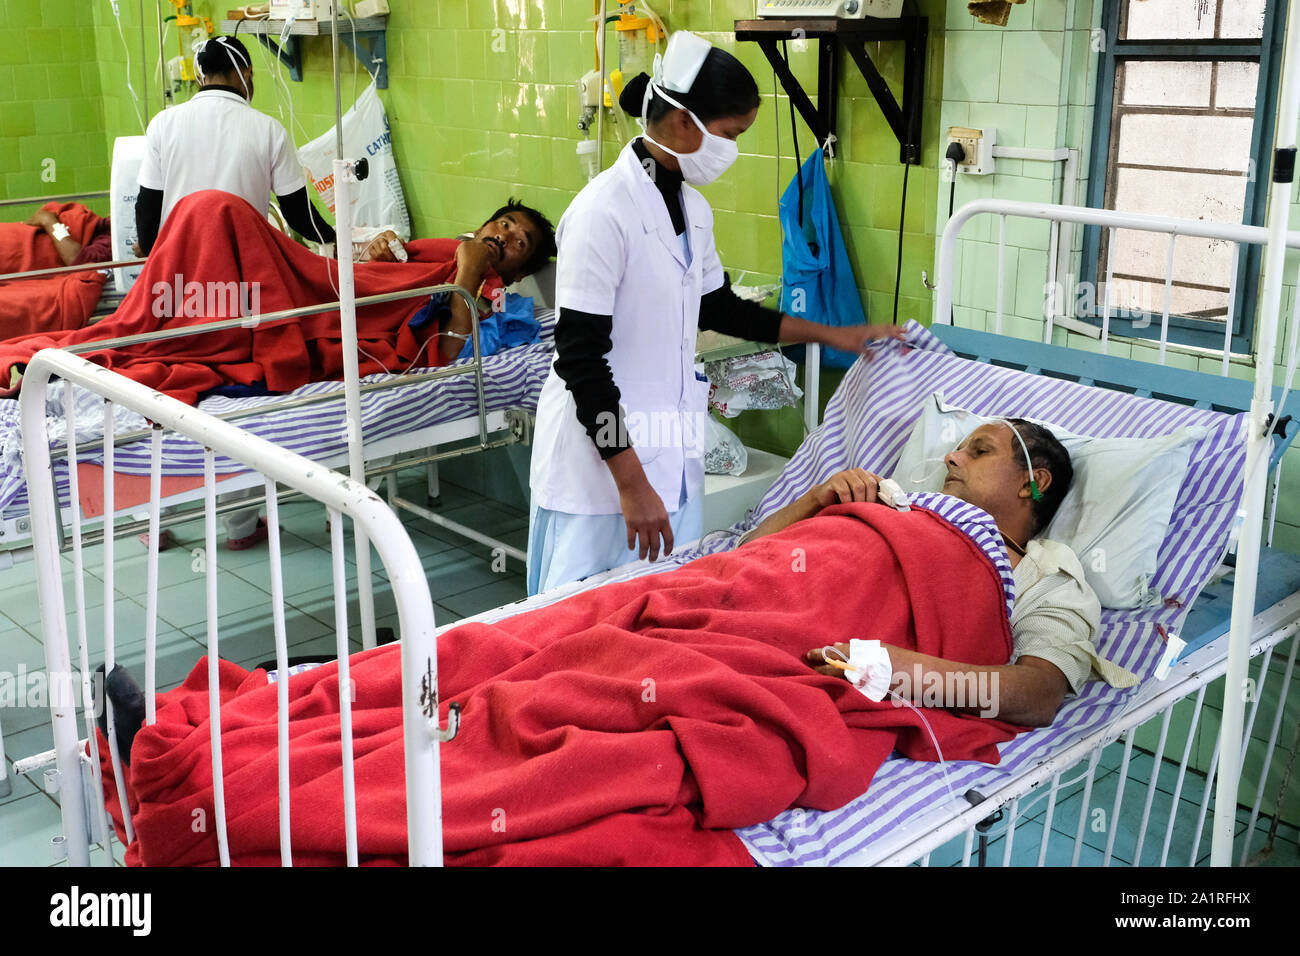 Patients India Hospital Bed High Resolution Stock Photography and Images - Alamy